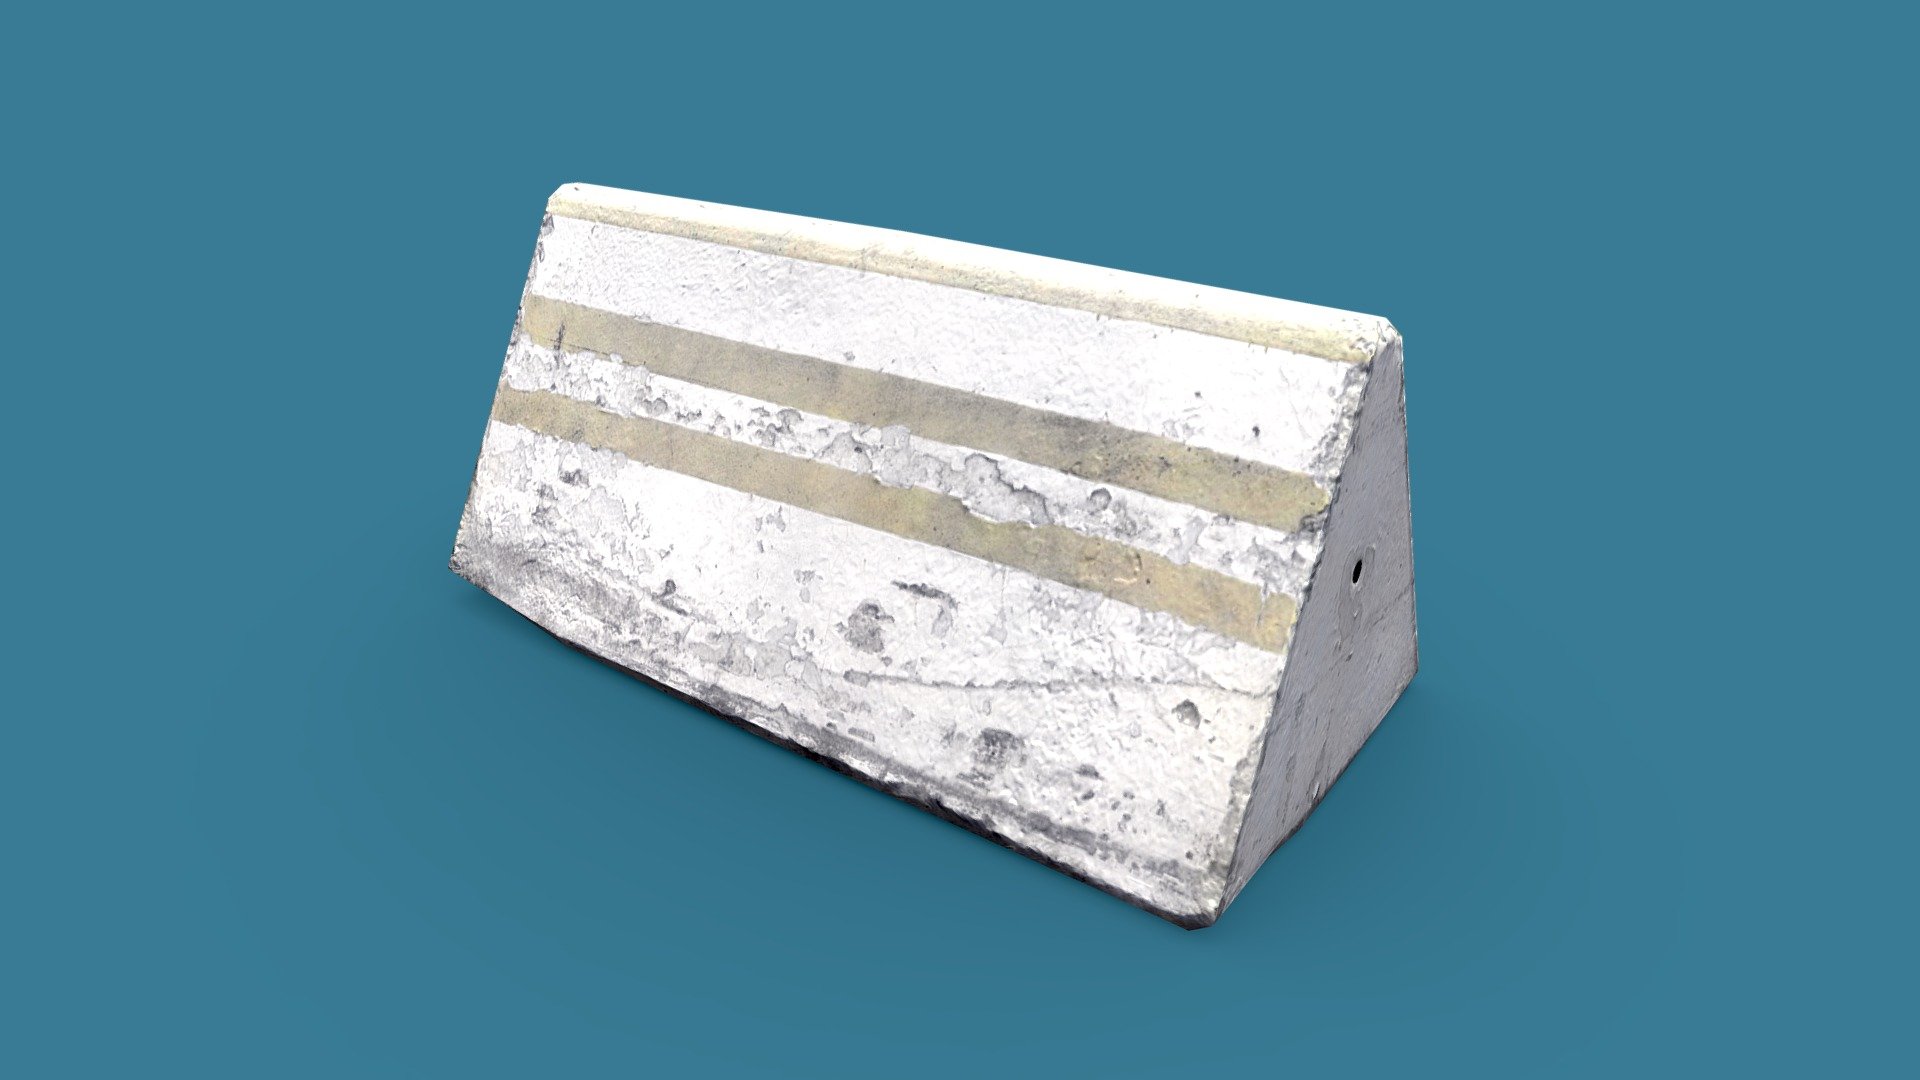 Lowpoly small concrete barrier - game ready model

1024x1024 px diffuse, normal, roughness, AO textures - Lowpoly Concrete Barrier Small - Buy Royalty Free 3D model by l0wpoly 3d model